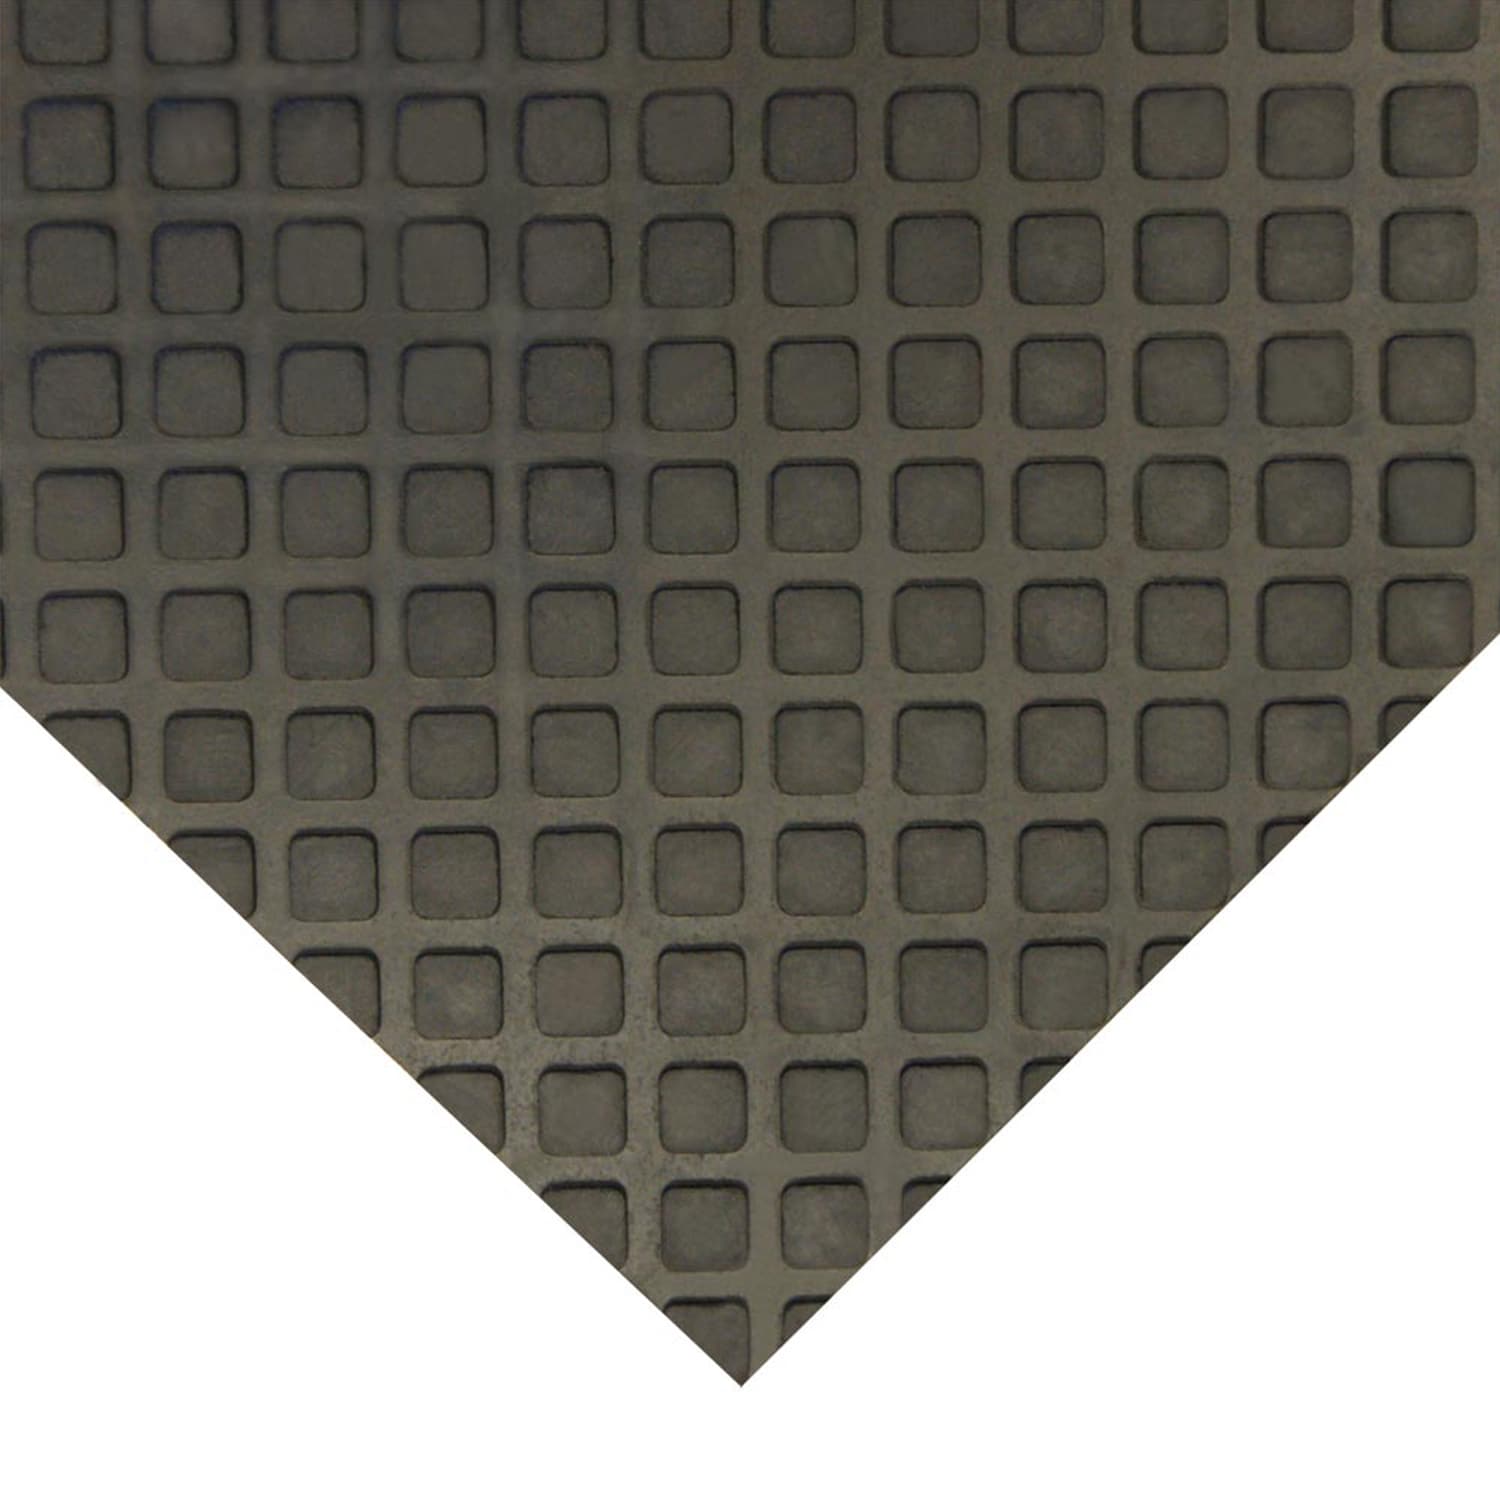 Rubber-Cal 2-ft x 3-ft Black Rectangular Indoor or Outdoor Home Utility Mat  in the Mats department at